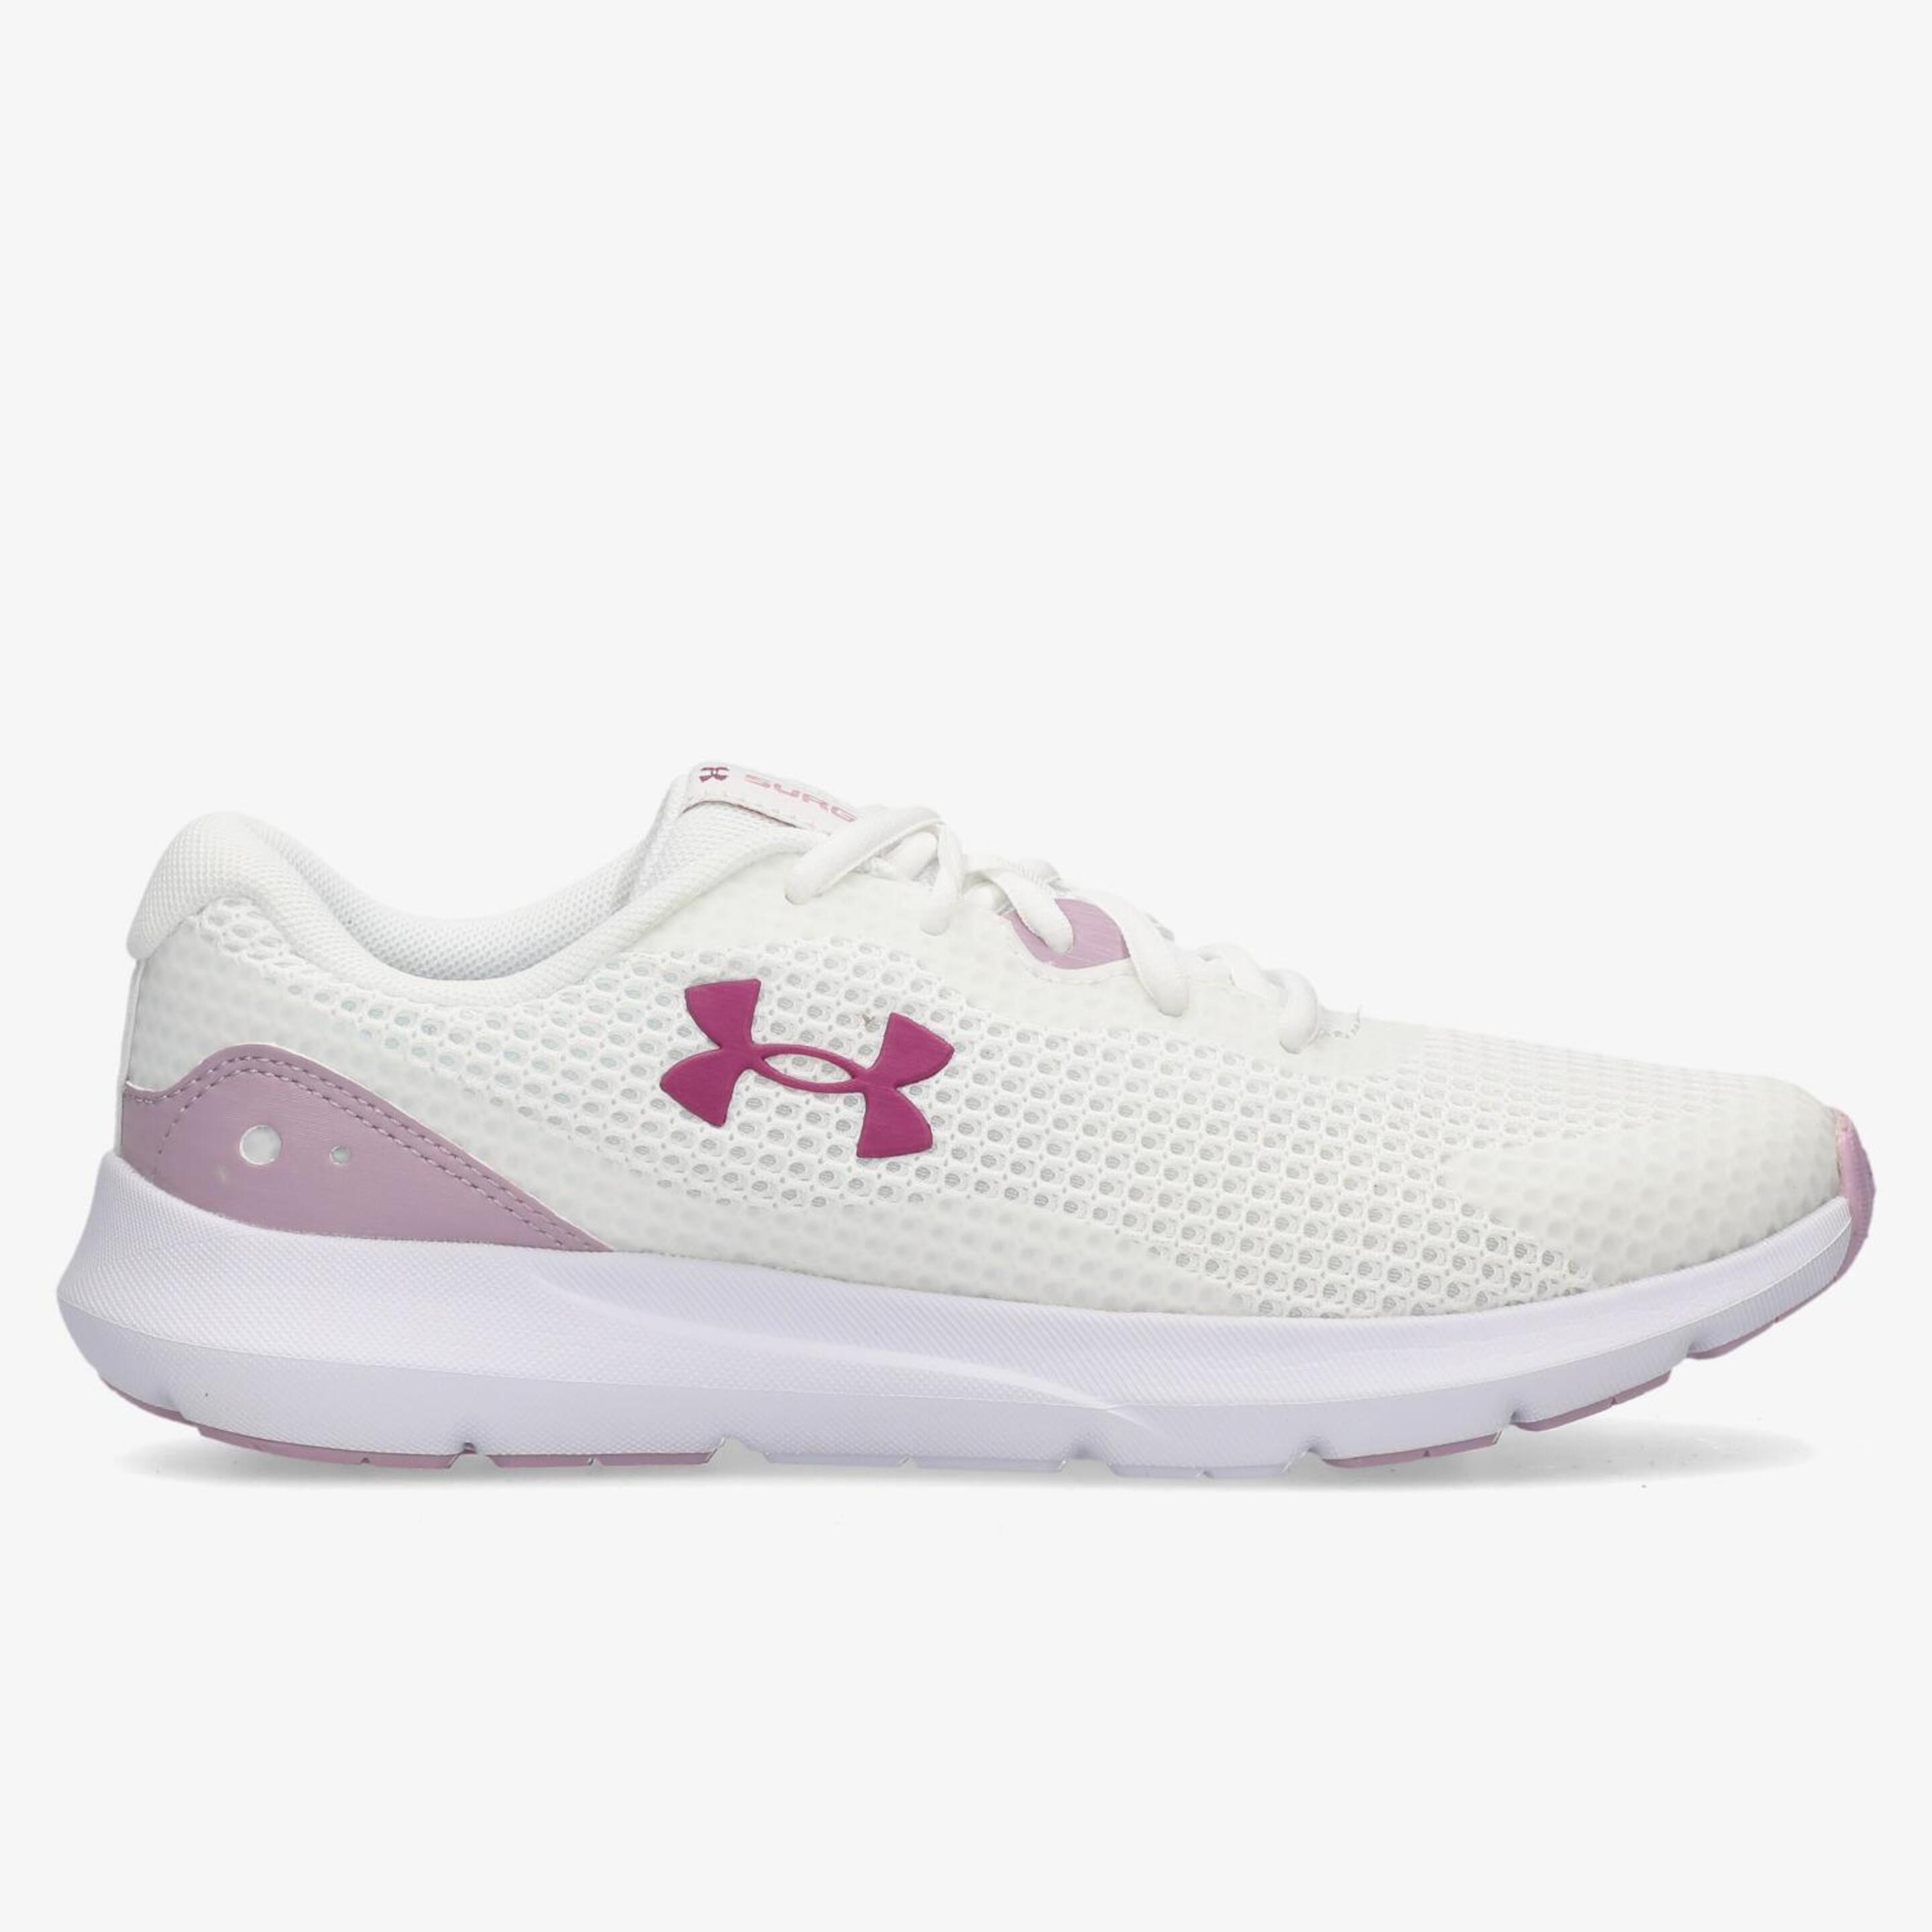 Under Armour Surge 3 - blanco - Sapatilhas Running Mulher